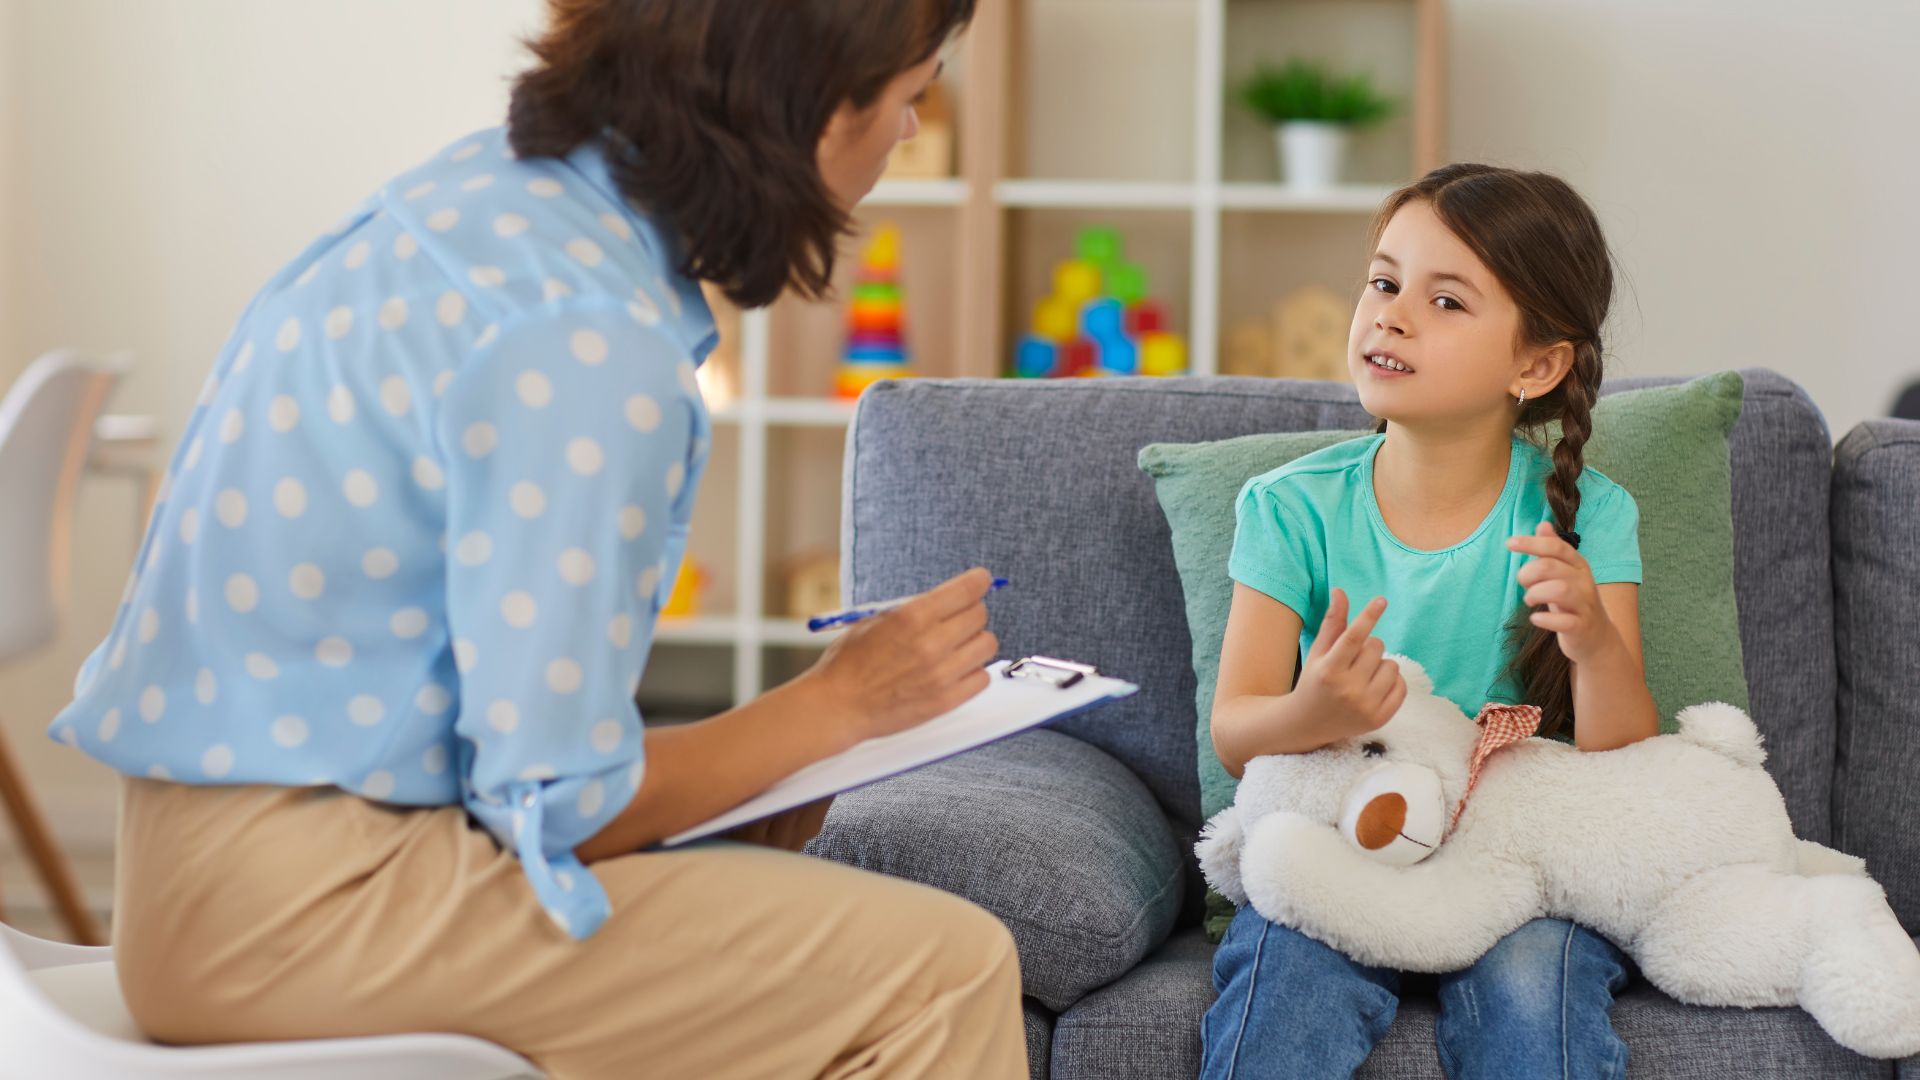 Oakville Child Counselling and Therapy Services